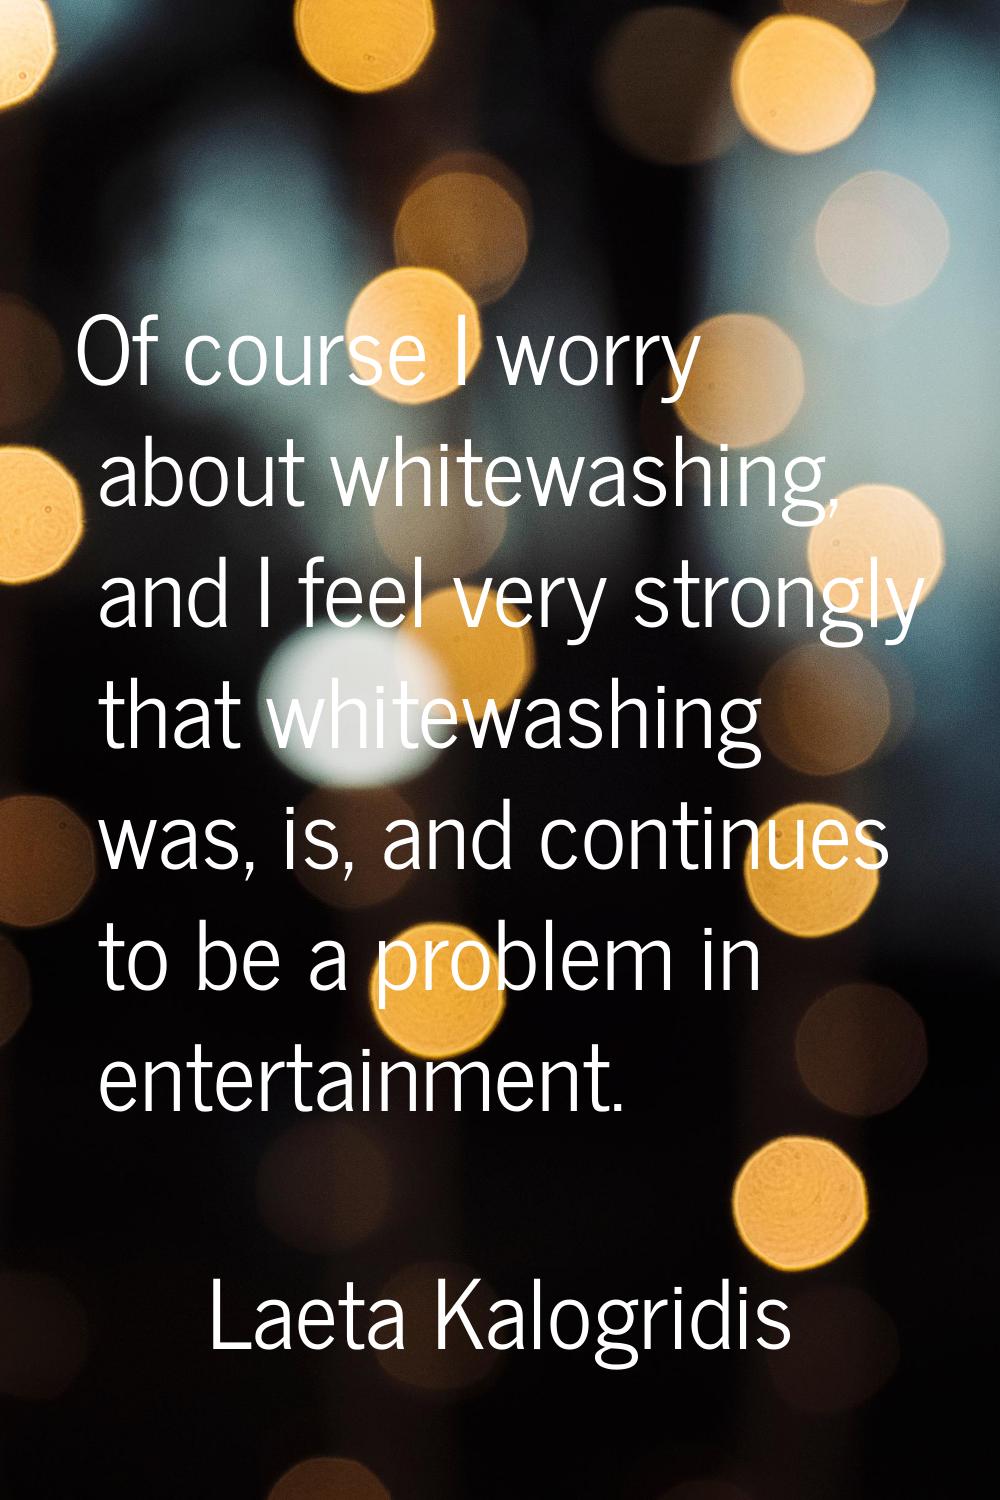 Of course I worry about whitewashing, and I feel very strongly that whitewashing was, is, and conti